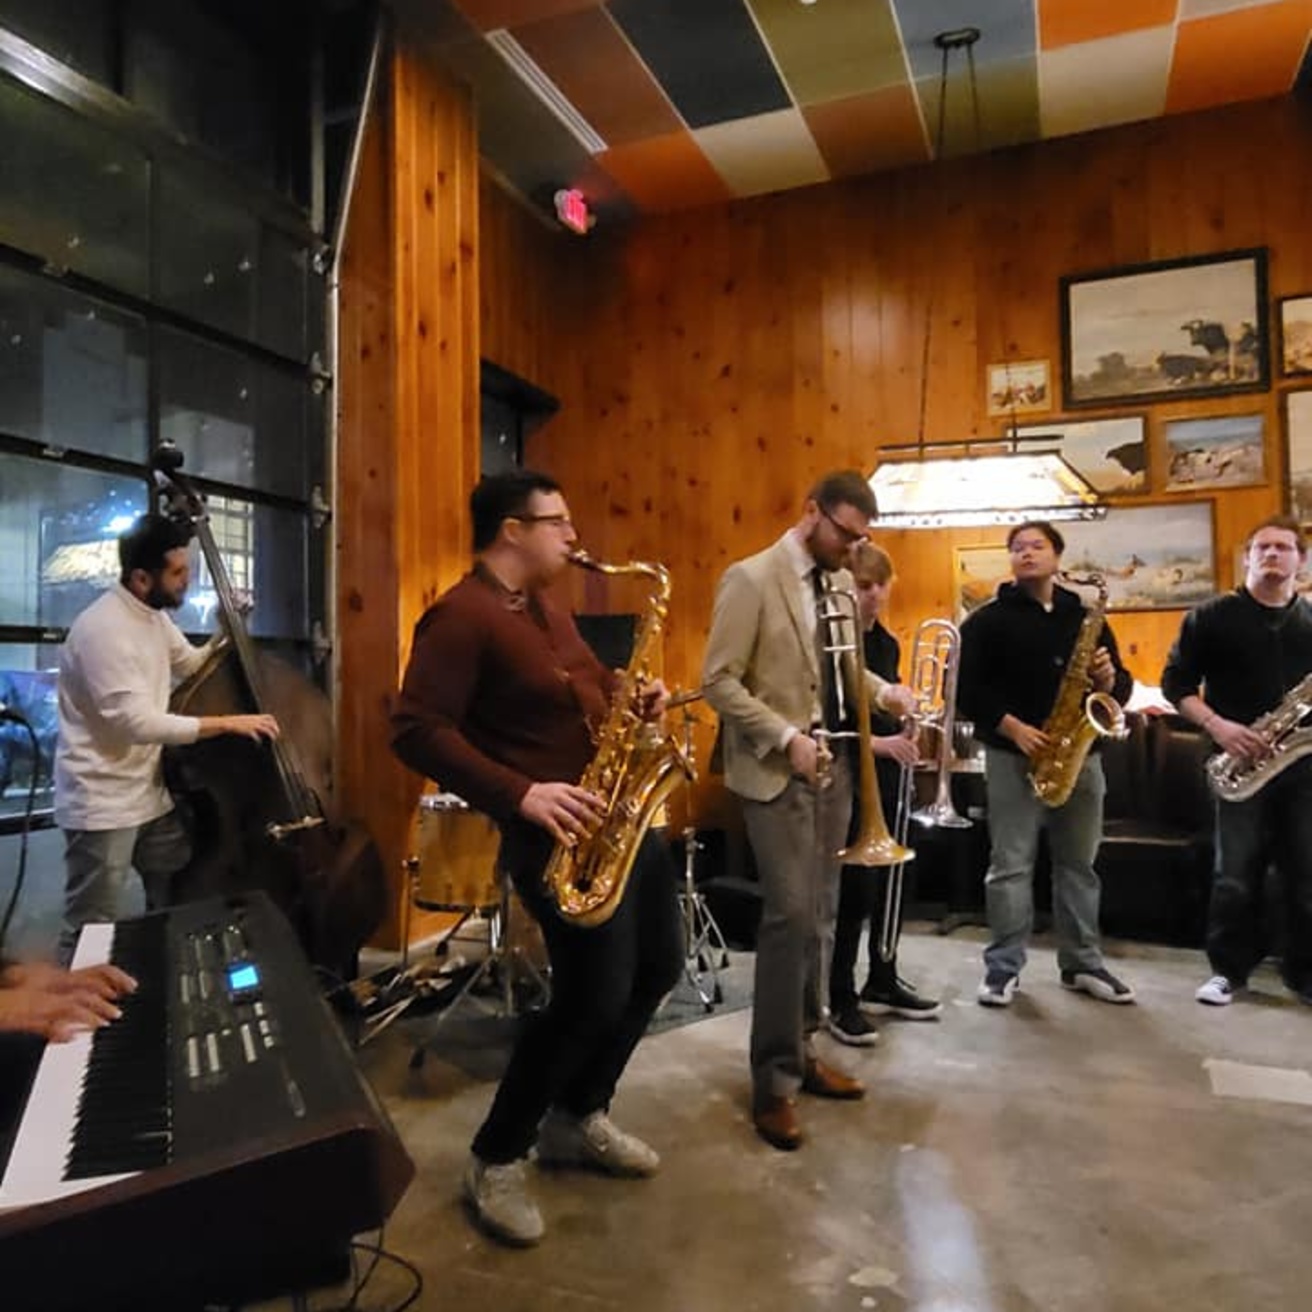 a recent jazz jam session with students  shown playing bass, saxophone, trumpet, trombone in a retro-styled restaurant setting